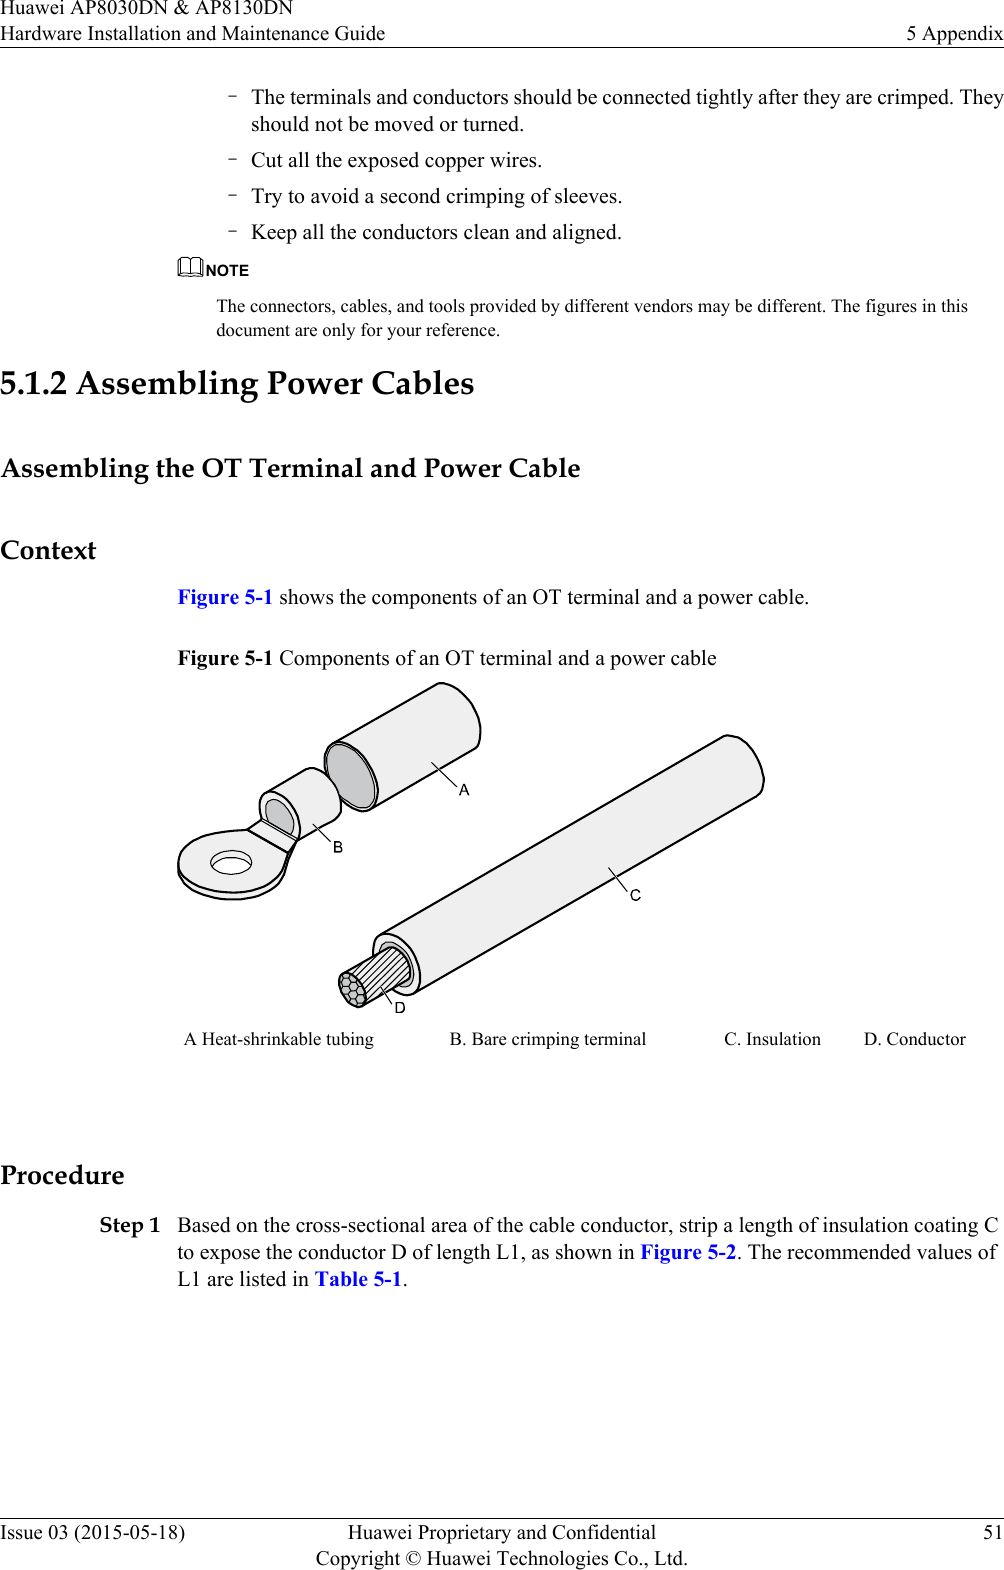 –The terminals and conductors should be connected tightly after they are crimped. Theyshould not be moved or turned.–Cut all the exposed copper wires.–Try to avoid a second crimping of sleeves.–Keep all the conductors clean and aligned.NOTEThe connectors, cables, and tools provided by different vendors may be different. The figures in thisdocument are only for your reference.5.1.2 Assembling Power CablesAssembling the OT Terminal and Power CableContextFigure 5-1 shows the components of an OT terminal and a power cable.Figure 5-1 Components of an OT terminal and a power cableA Heat-shrinkable tubing B. Bare crimping terminal C. Insulation D. Conductor ProcedureStep 1 Based on the cross-sectional area of the cable conductor, strip a length of insulation coating Cto expose the conductor D of length L1, as shown in Figure 5-2. The recommended values ofL1 are listed in Table 5-1.Huawei AP8030DN &amp; AP8130DNHardware Installation and Maintenance Guide 5 AppendixIssue 03 (2015-05-18) Huawei Proprietary and ConfidentialCopyright © Huawei Technologies Co., Ltd.51